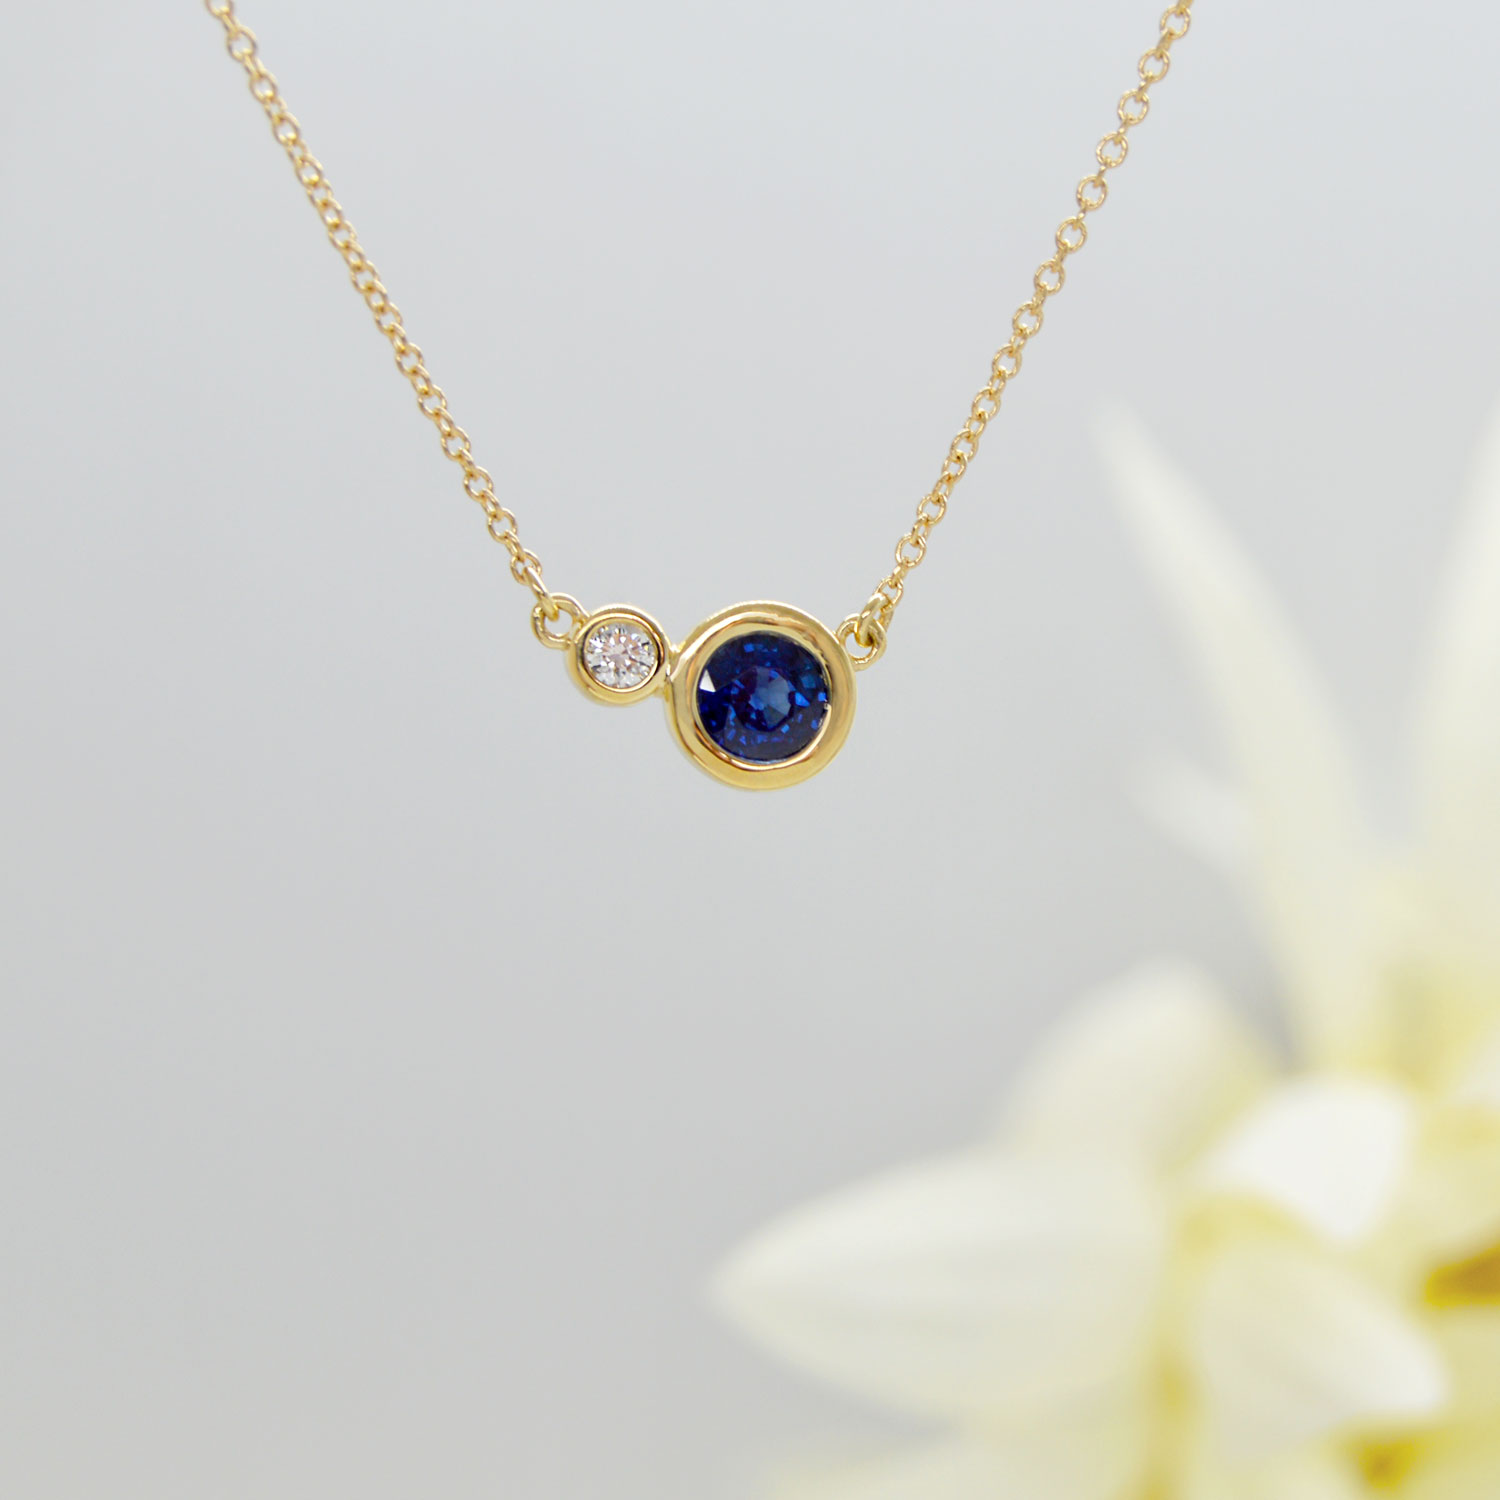 Blue Sapphire Necklace Minimalistic Necklace Jewelry Gifts 